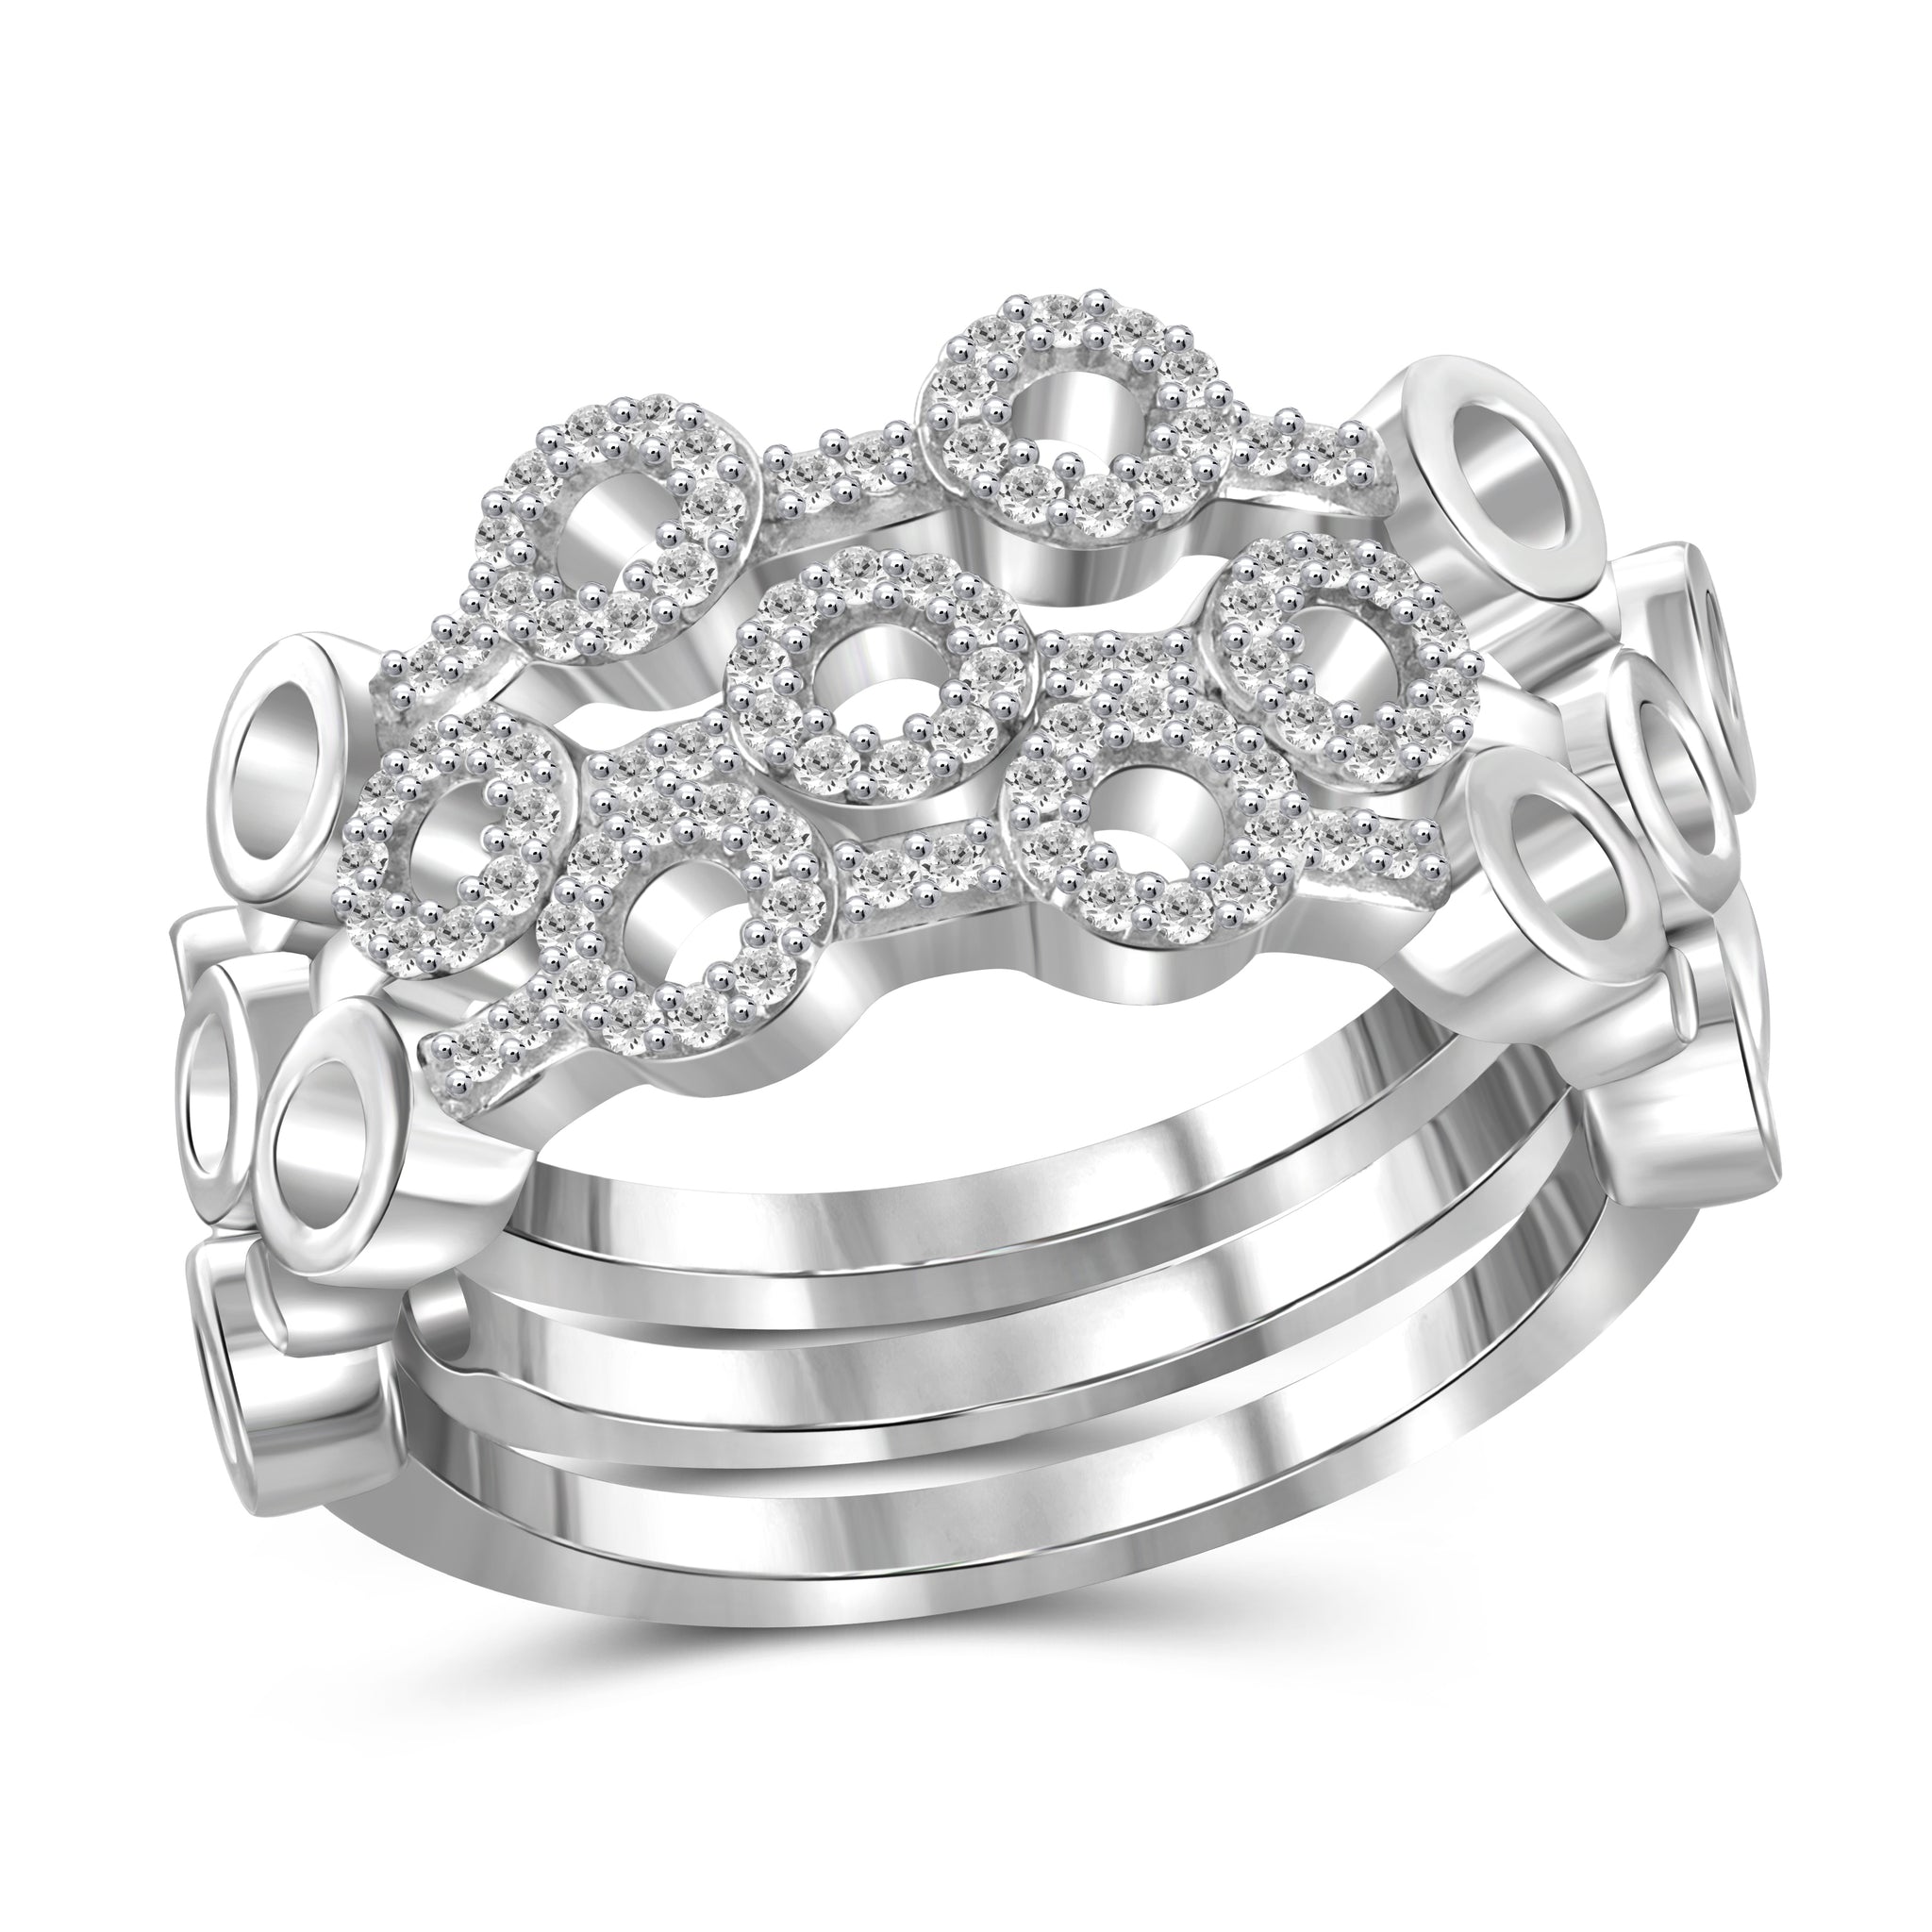 JewelonFire 1/4 Carat T.W. White Diamond Sterling Silver Stackable Ring - Assorted Colors